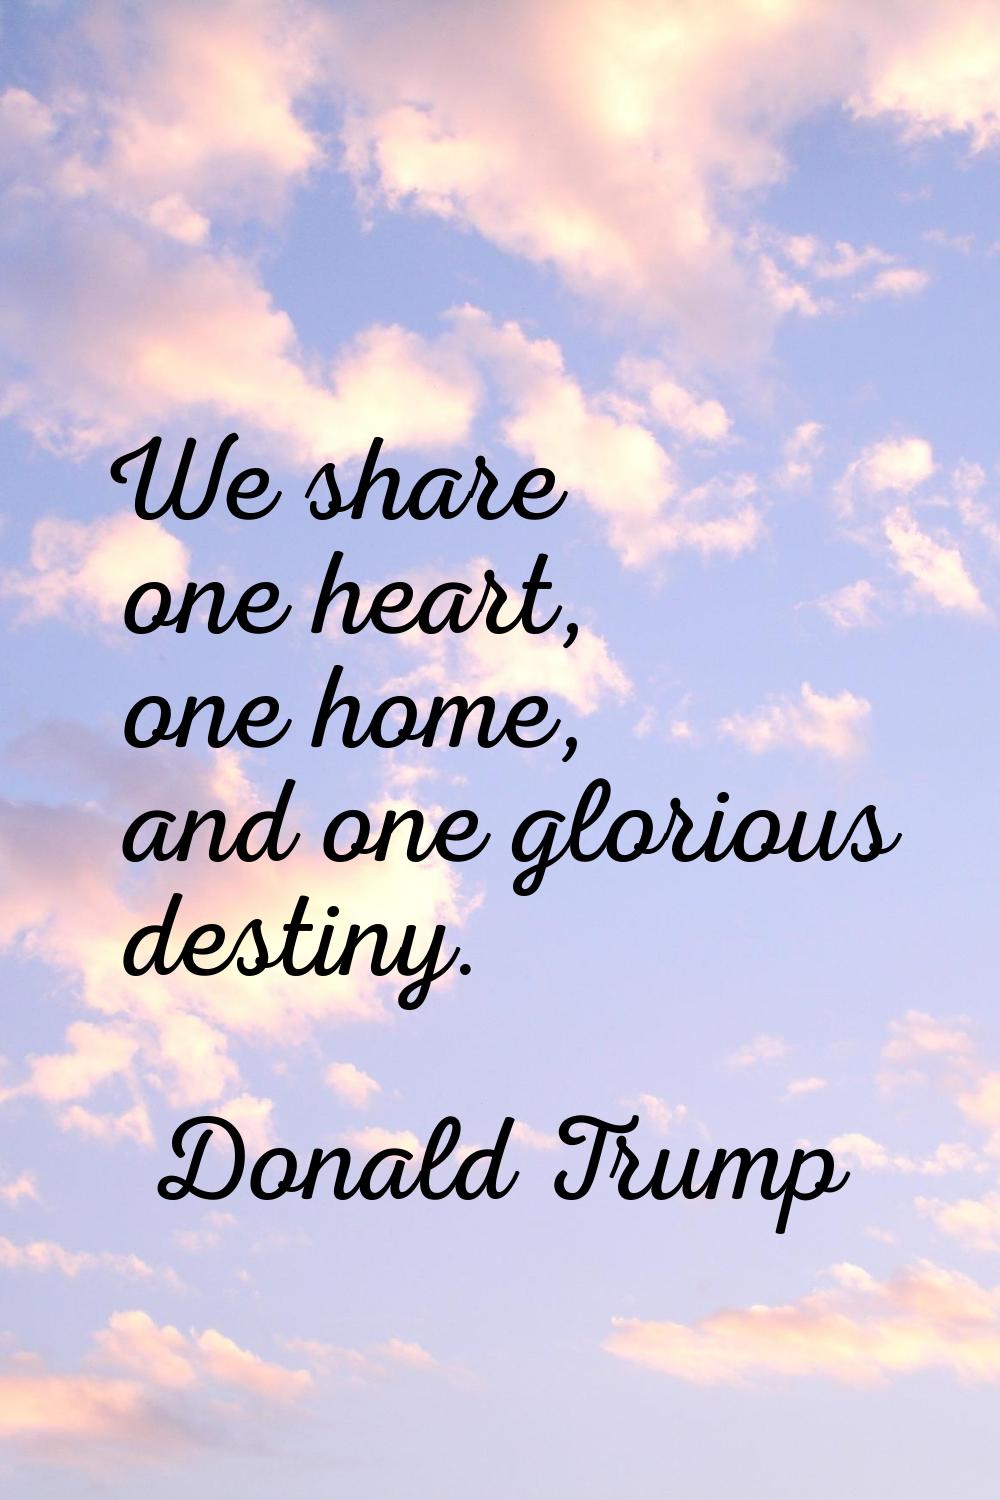 We share one heart, one home, and one glorious destiny.